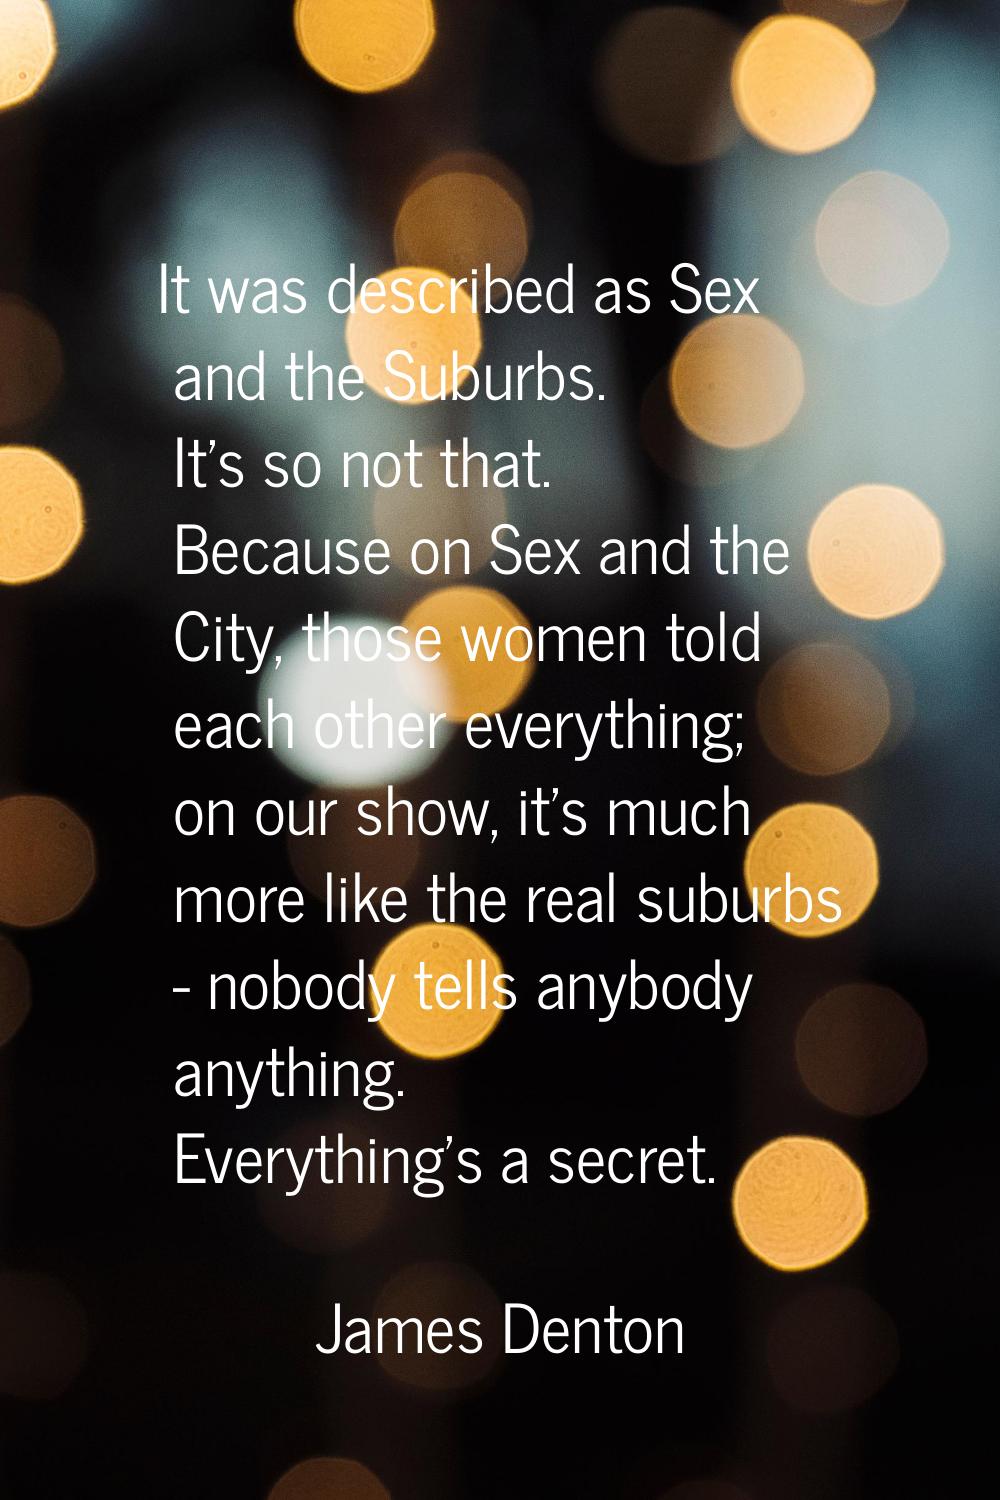 It was described as Sex and the Suburbs. It's so not that. Because on Sex and the City, those women